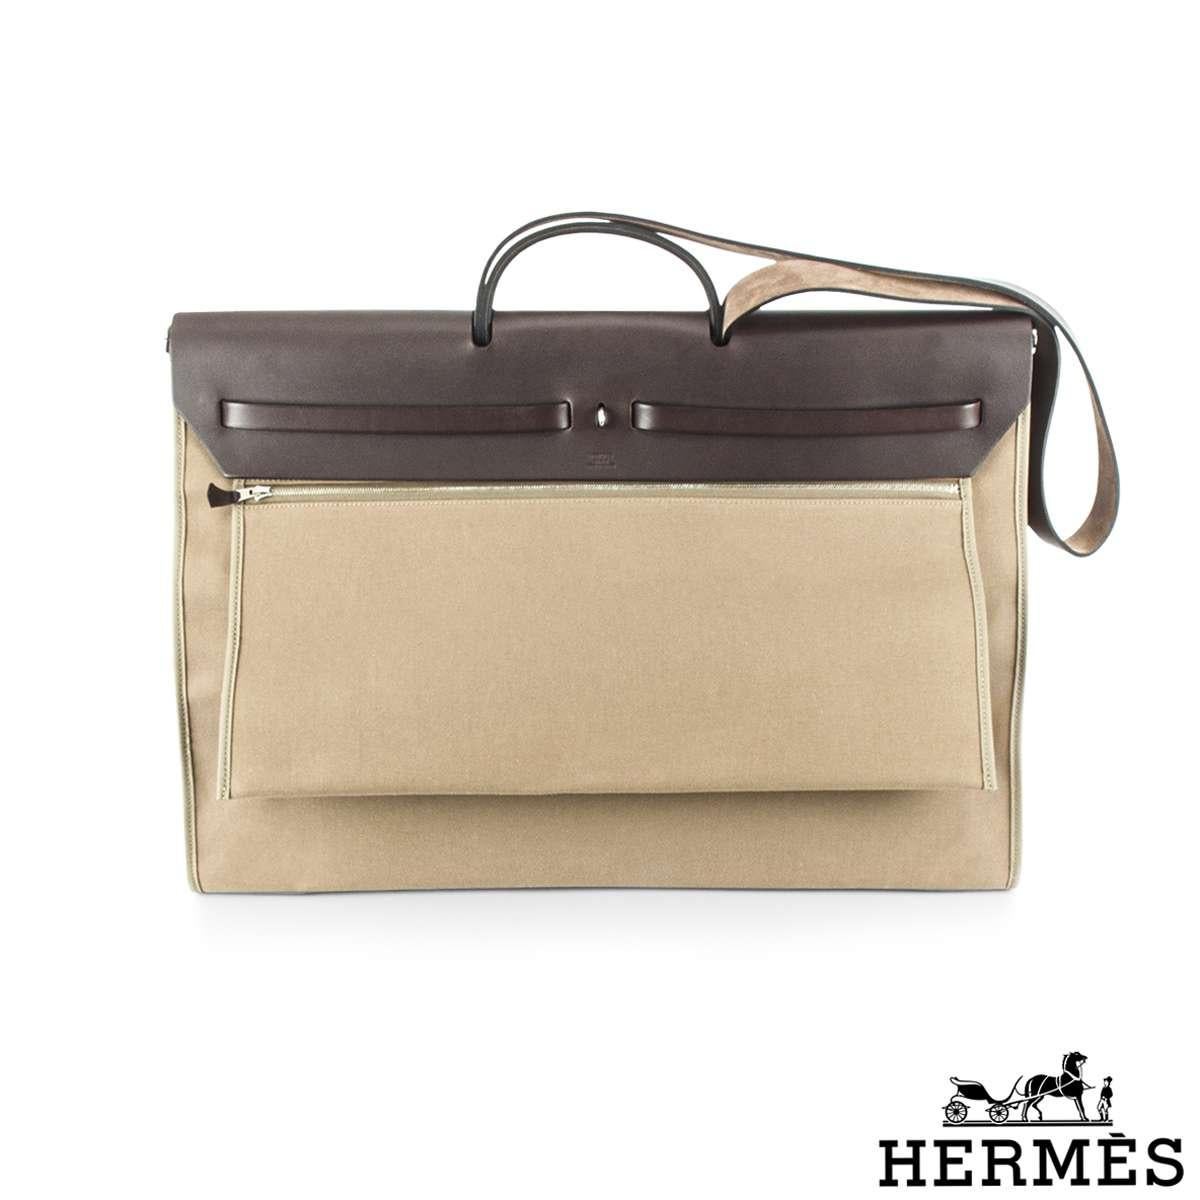 A chic and stylish Hermes Herbag Zip. The exterior of this Herbag features a top handle with a crossbody strap in Ebene Vache Hunter leather on the top section whereas the body of the bag is made out of canvas, has a Clou de Selle closure and is